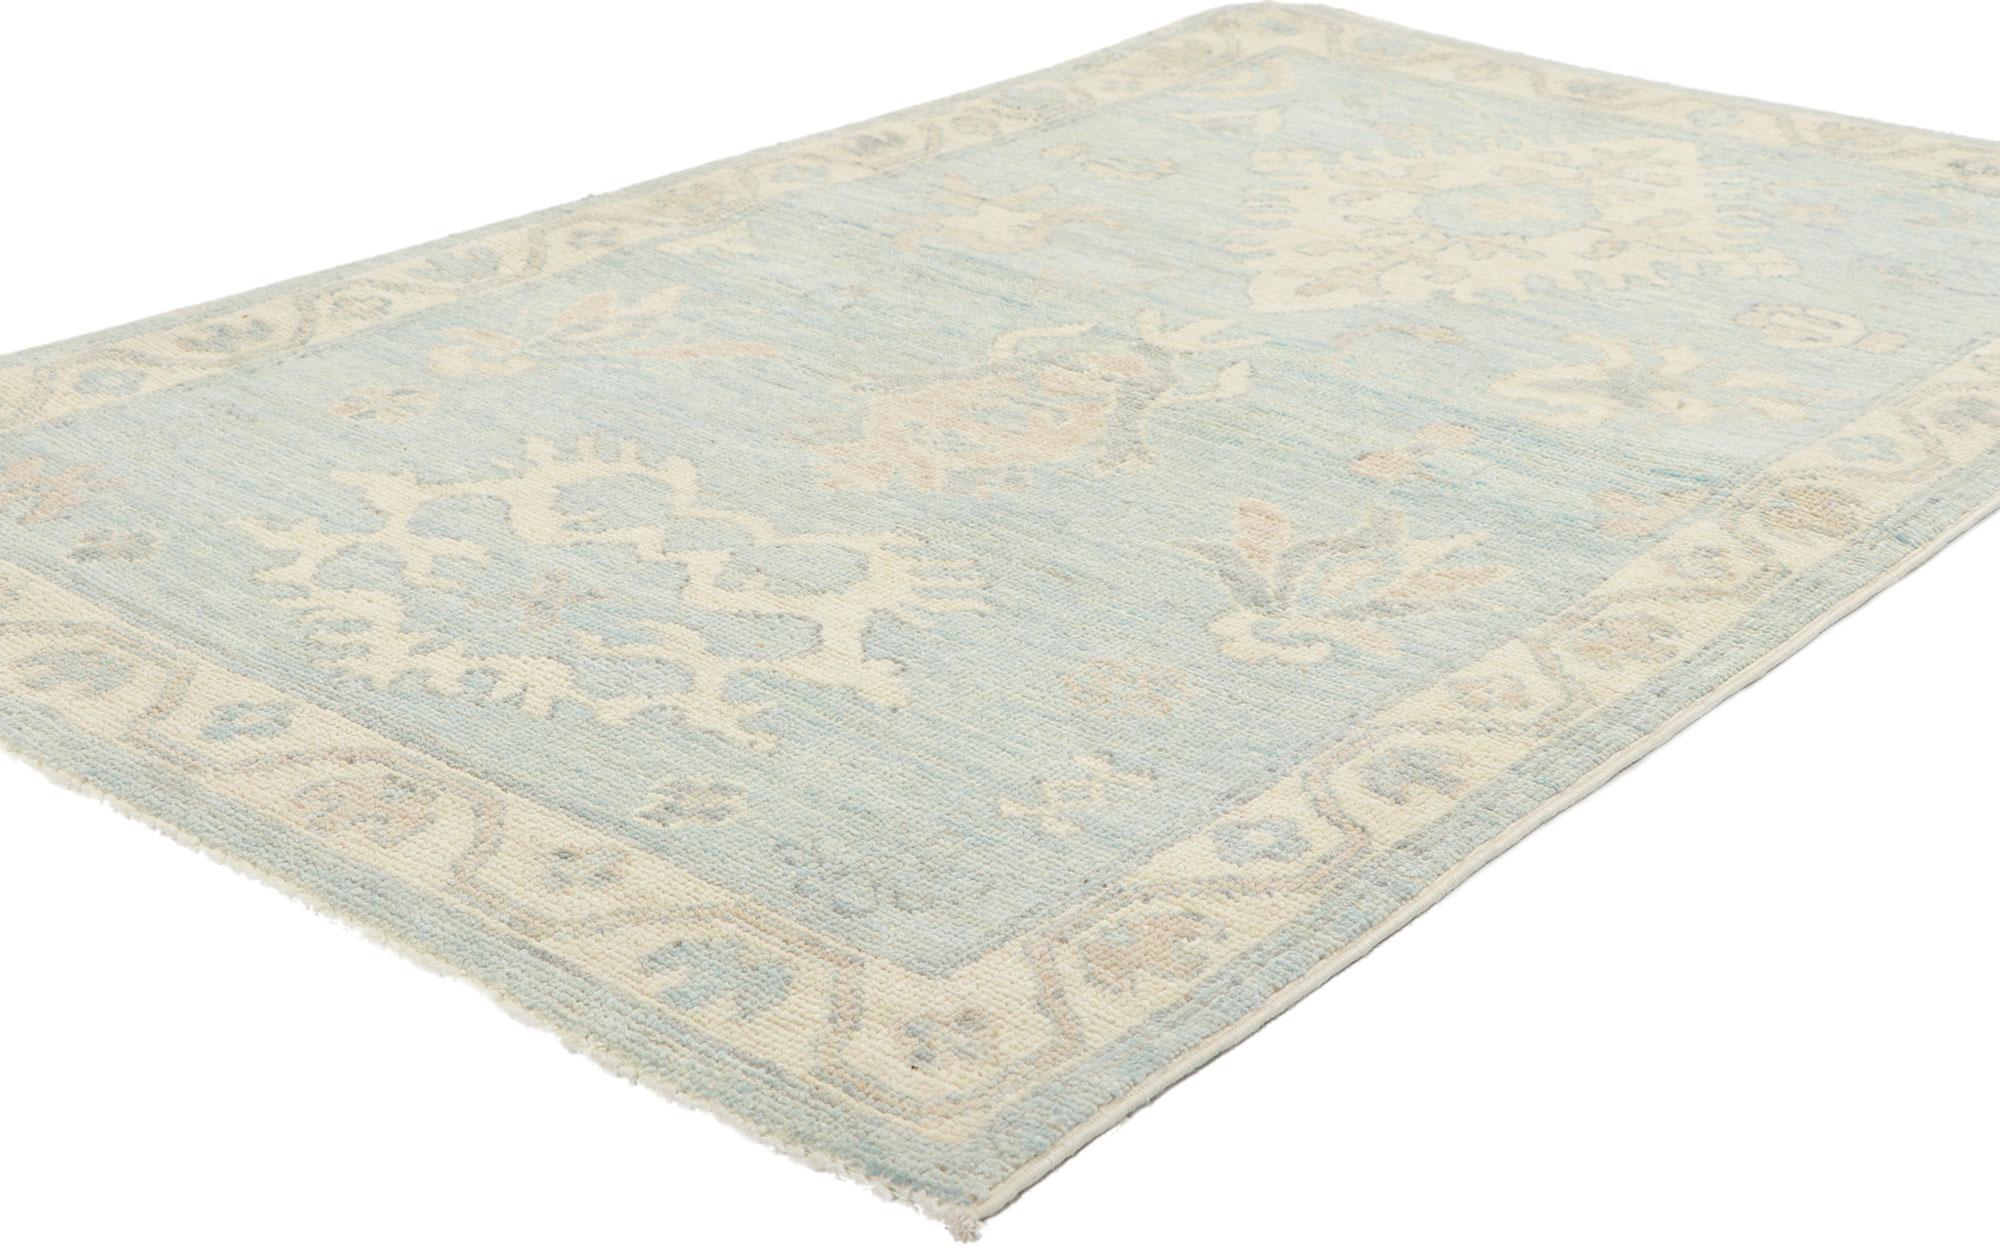 80845 New Light Blue Oushak Rug, 03'00 x 04'11. Serene and sophisticated, this hand-knotted wool light blue Oushak rug beautifully embodies a modern style. The composition features an allover botanical pattern composed of amorphous organic motifs